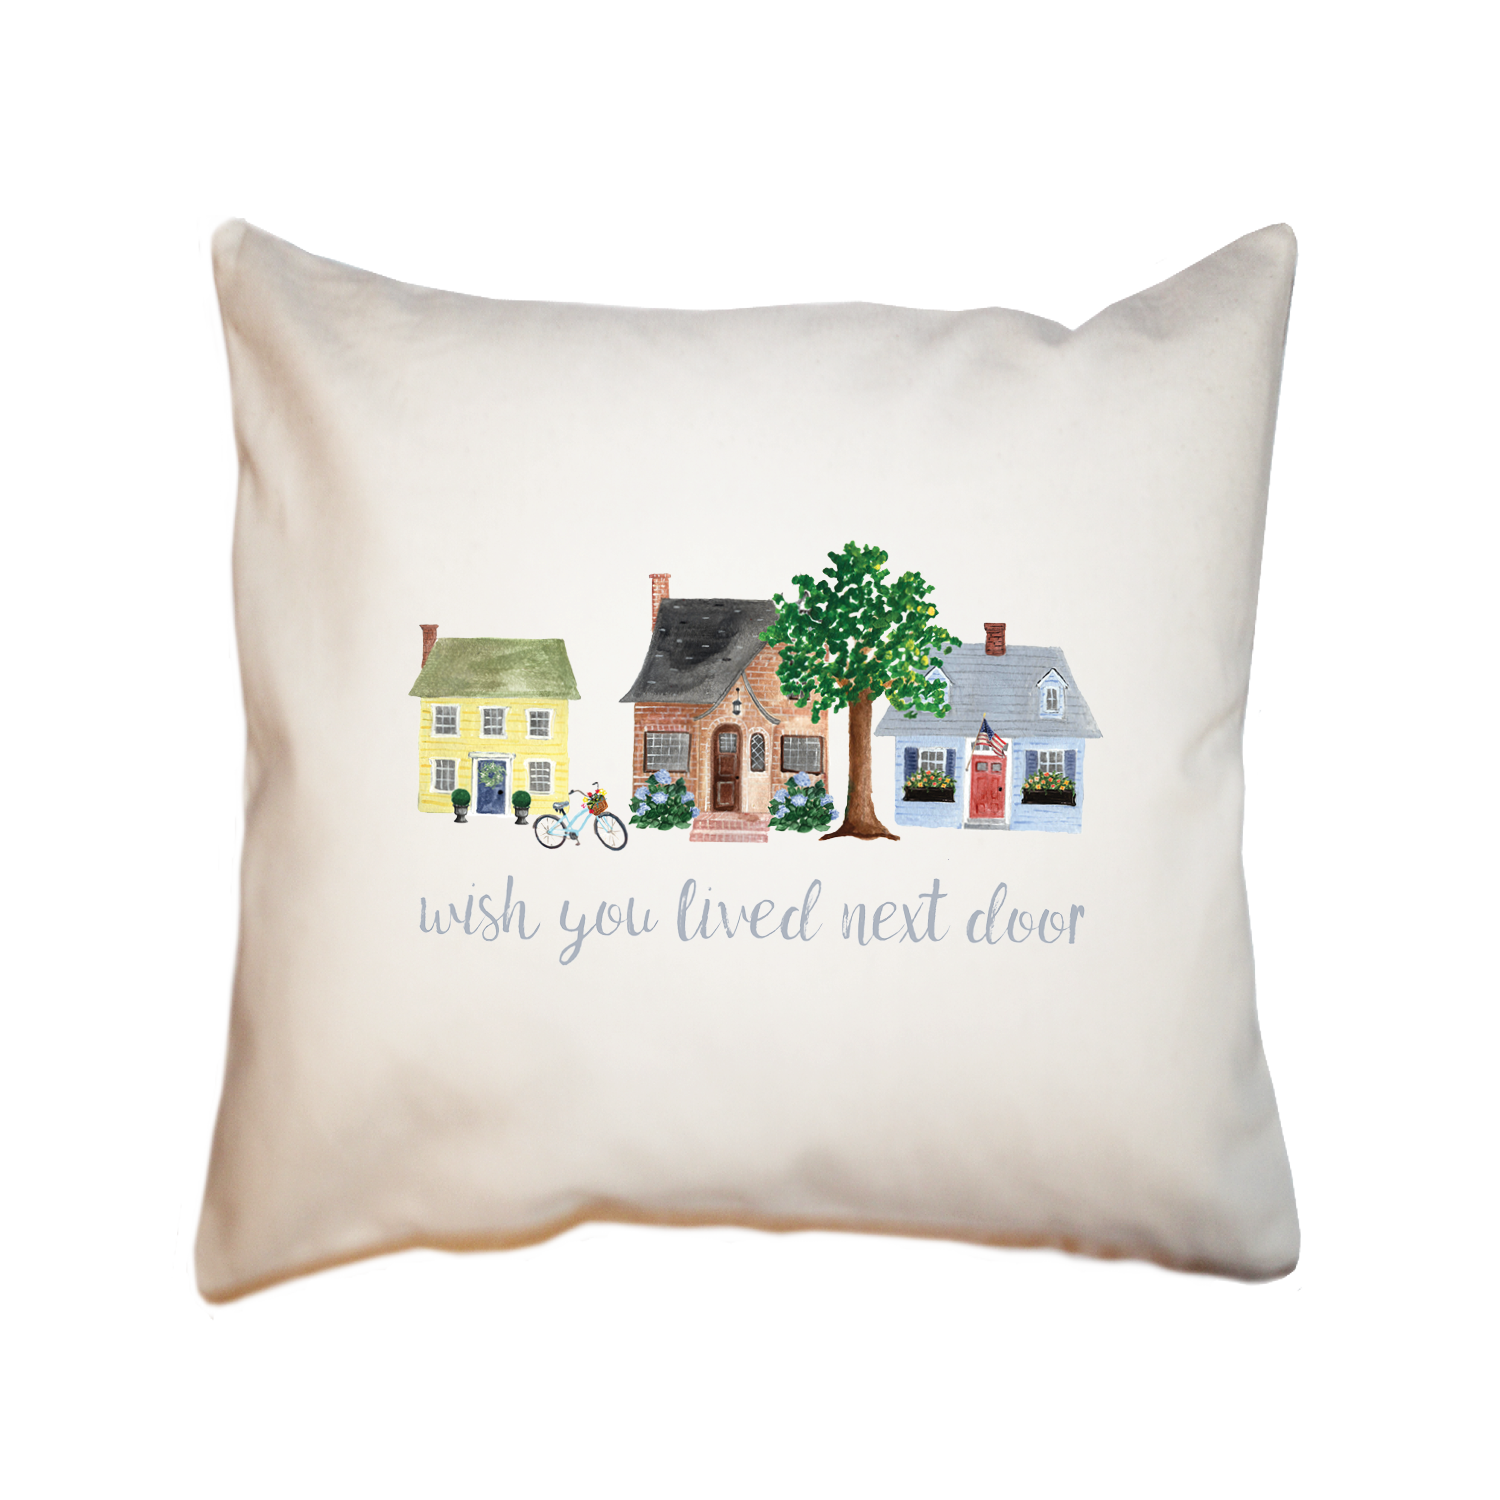 lived next door square pillow